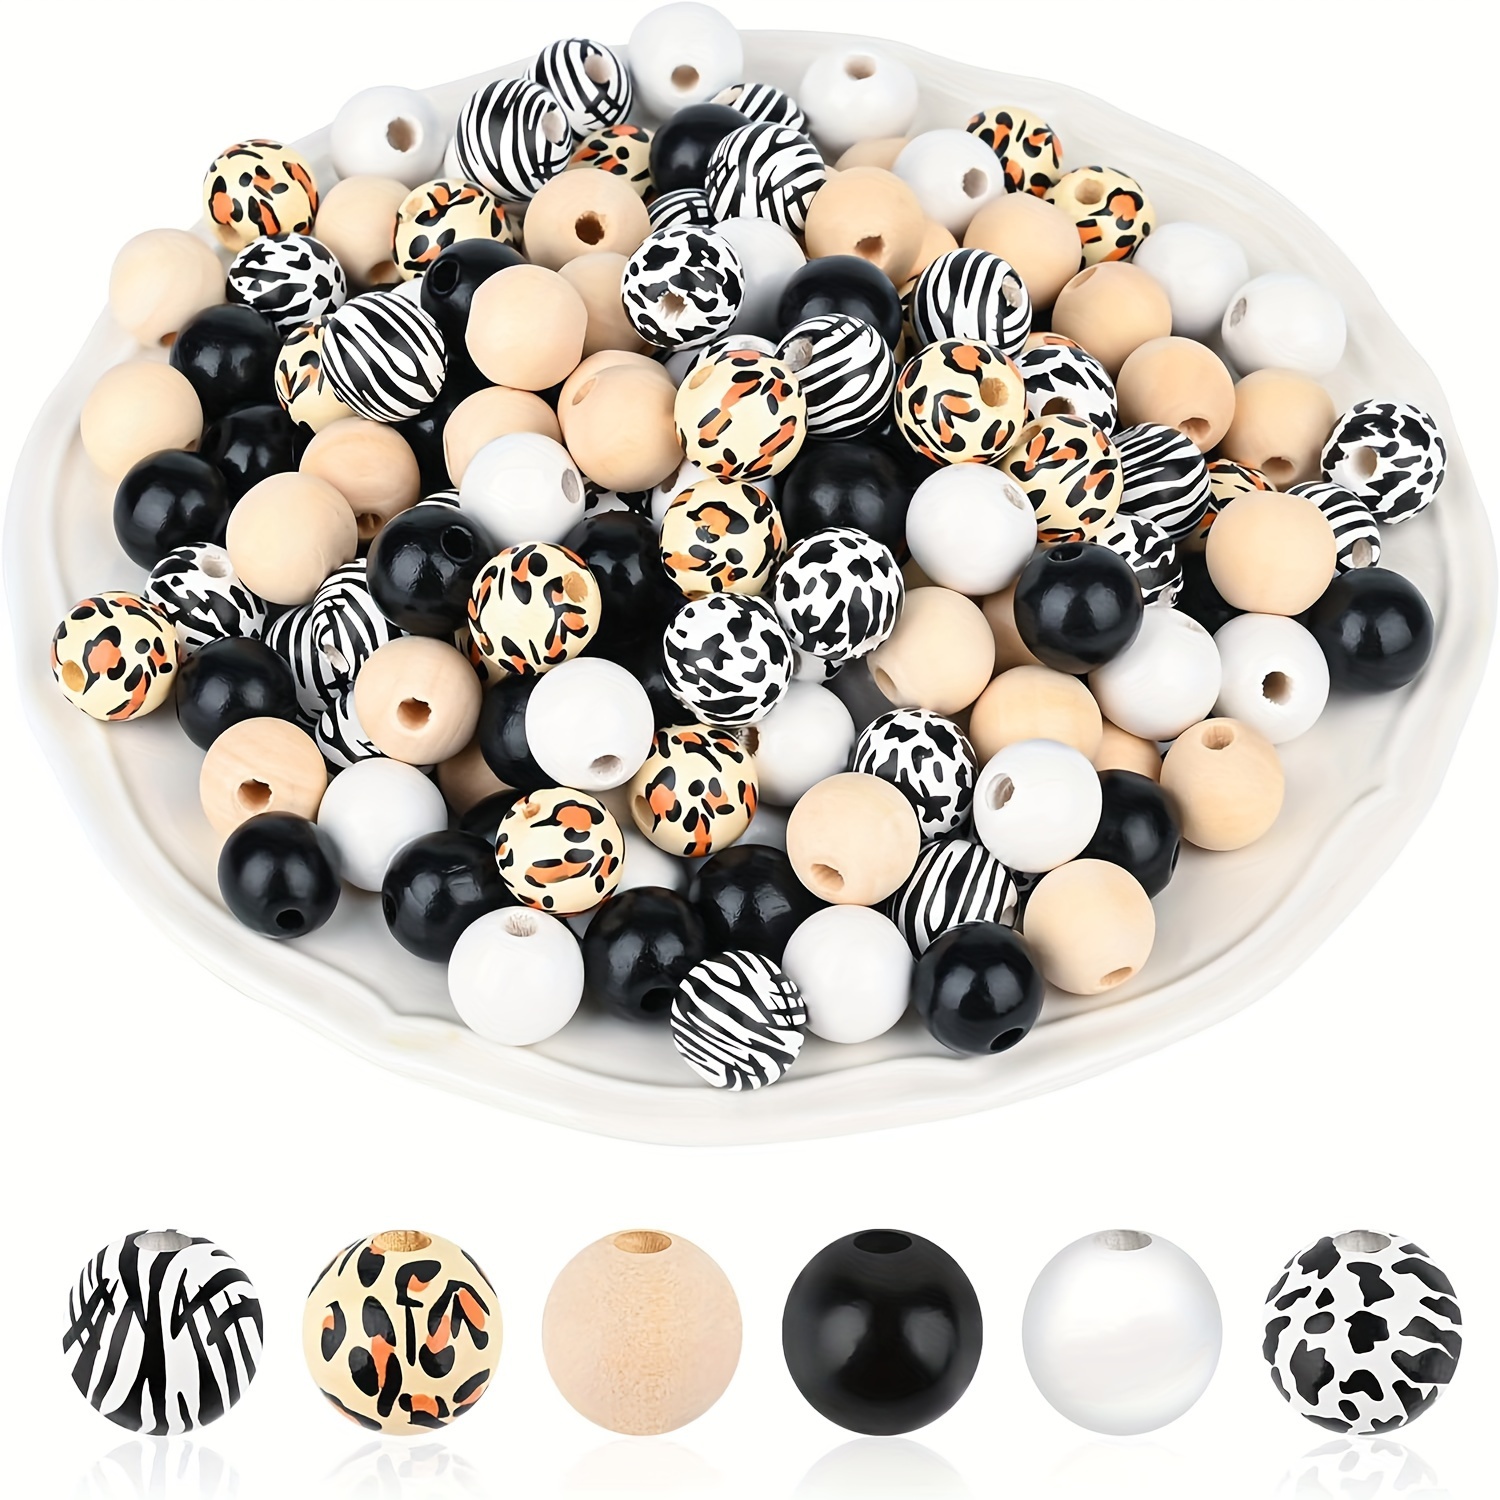 

60pcs 16mm/0.63in Leopard-print Cow Zebra Print Wooden Beads For Jewelry Making Diy Woodland Party Decors Accessories